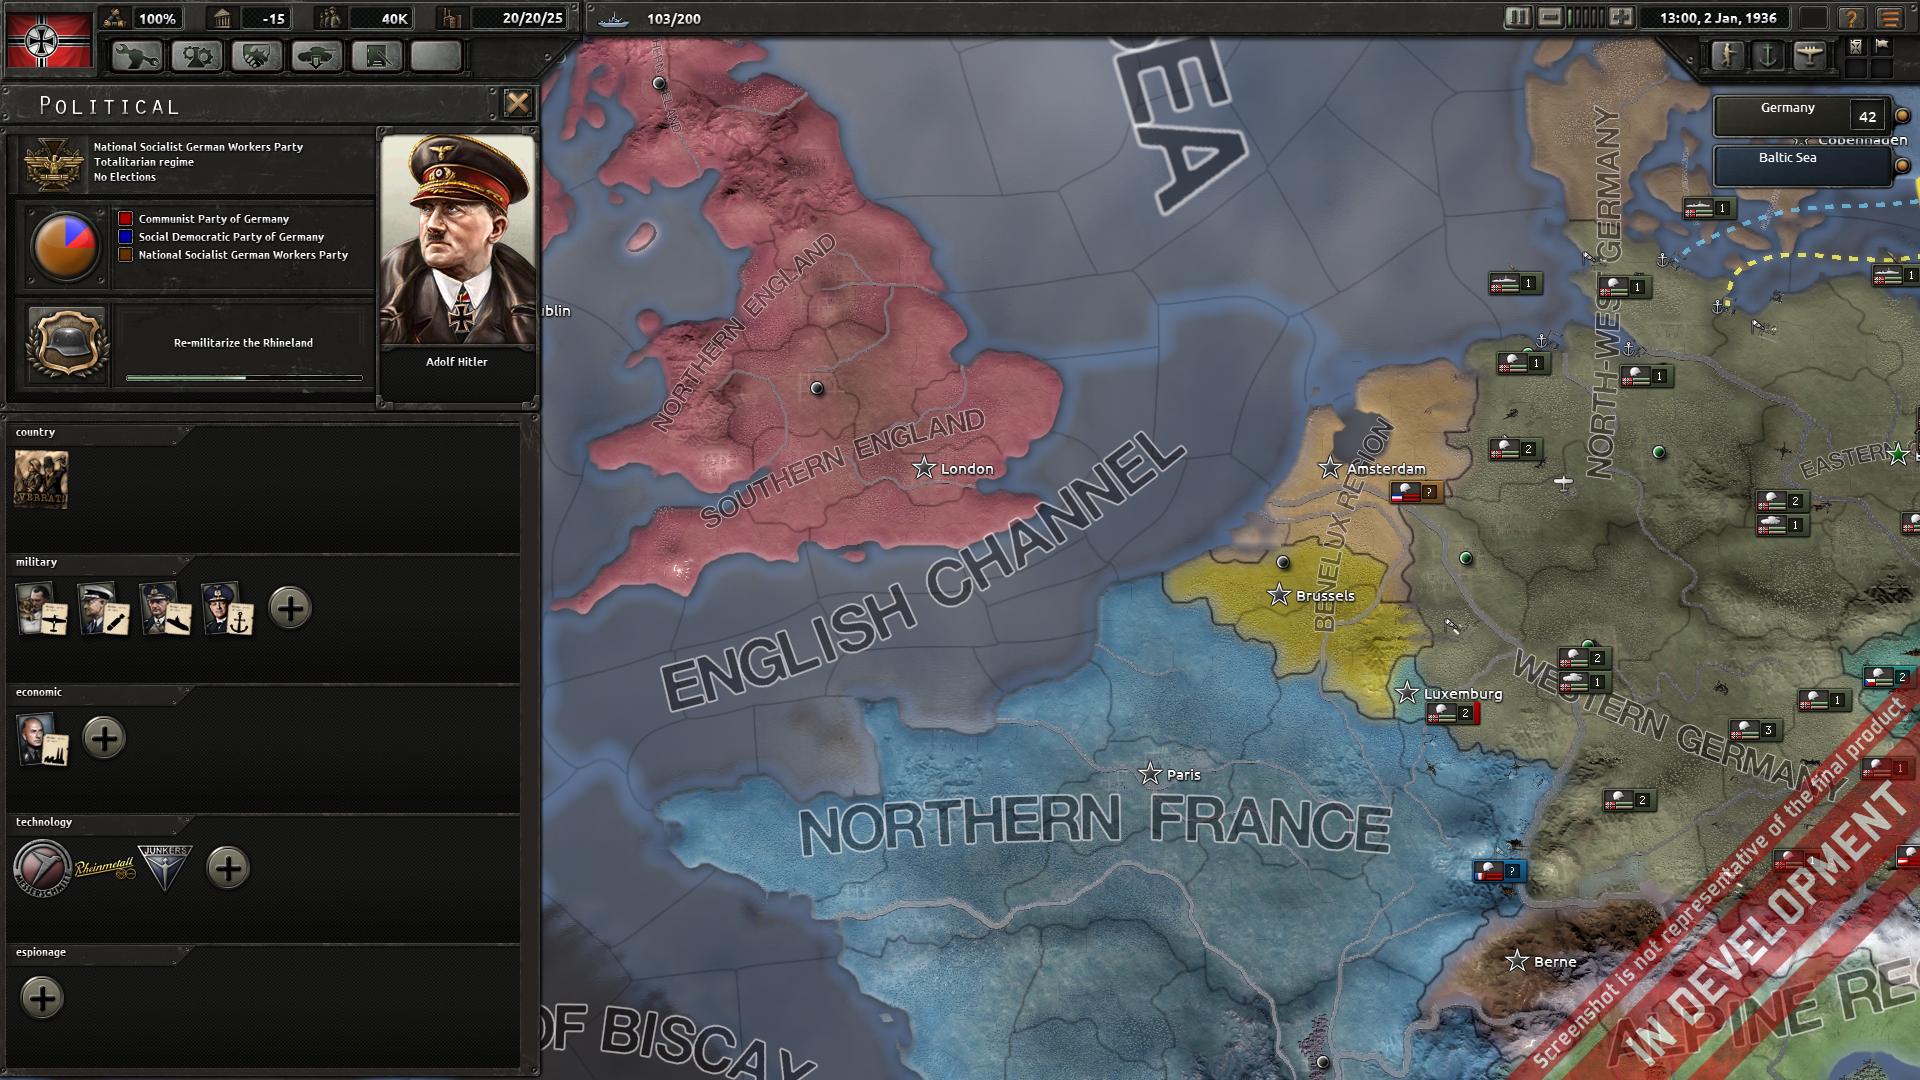 darkest hour a hearts of iron game more research teams